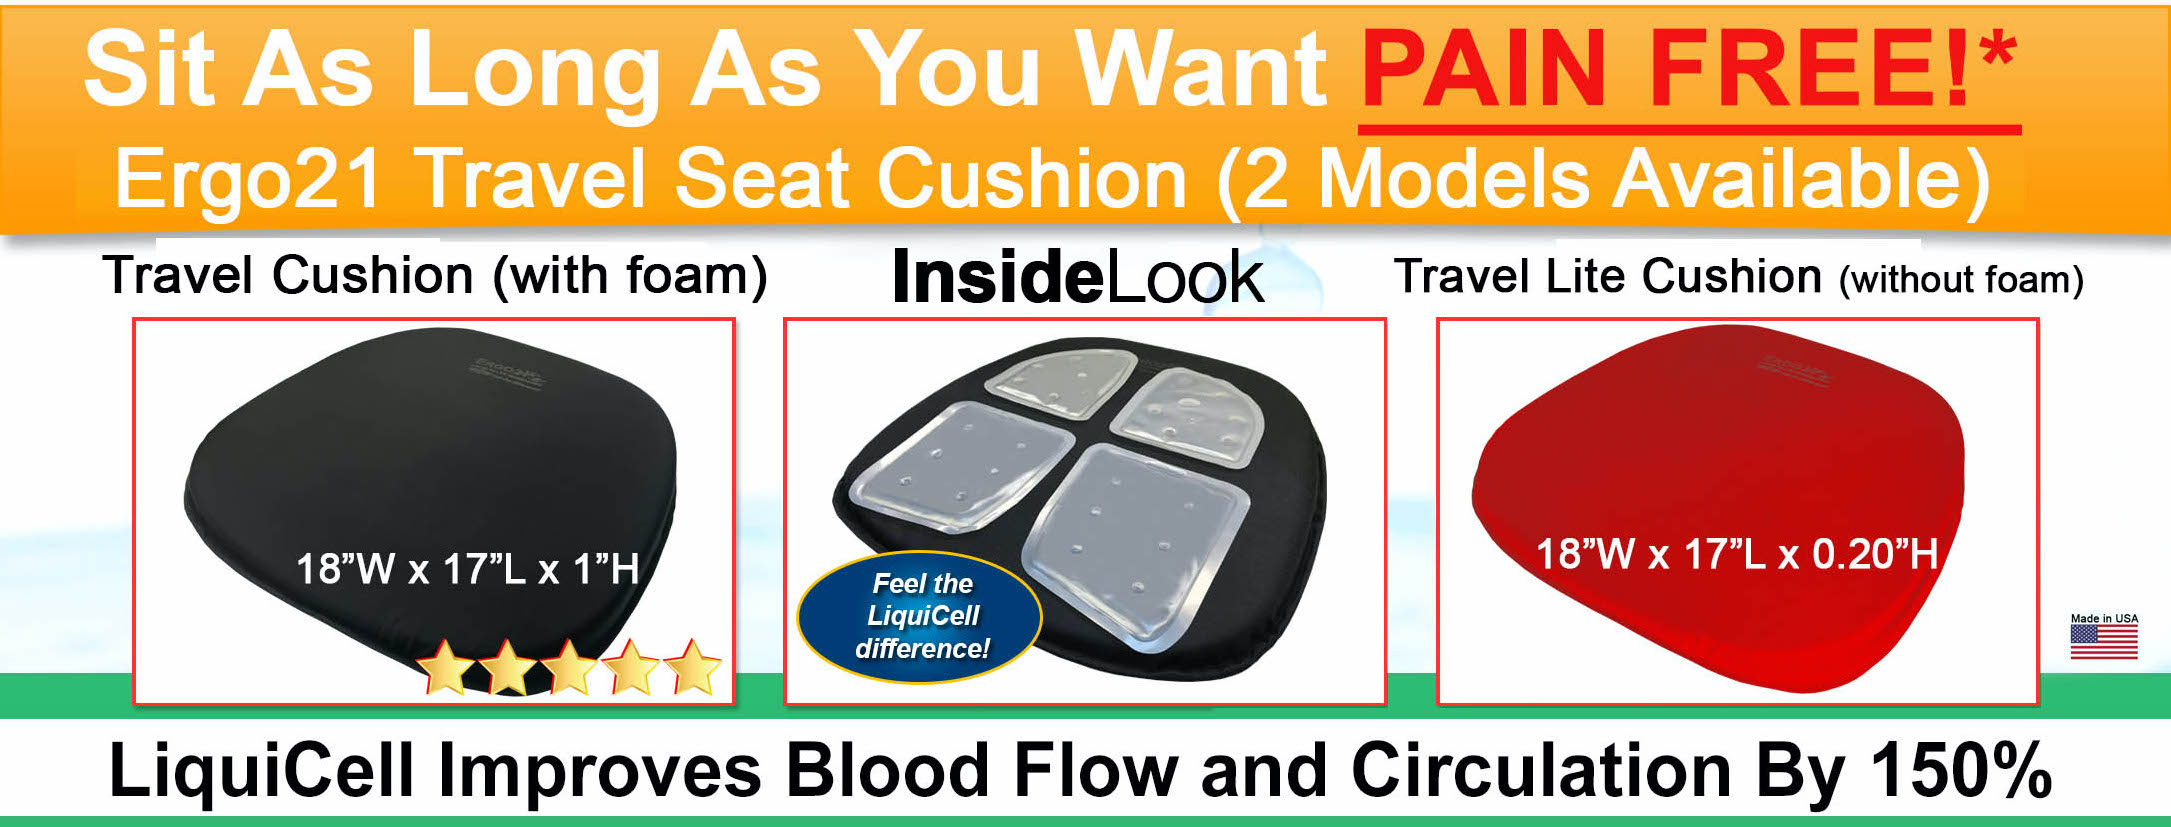 Struggling With Tailbone Pain Relief? – Try Coccyx Cushion - Ergo21